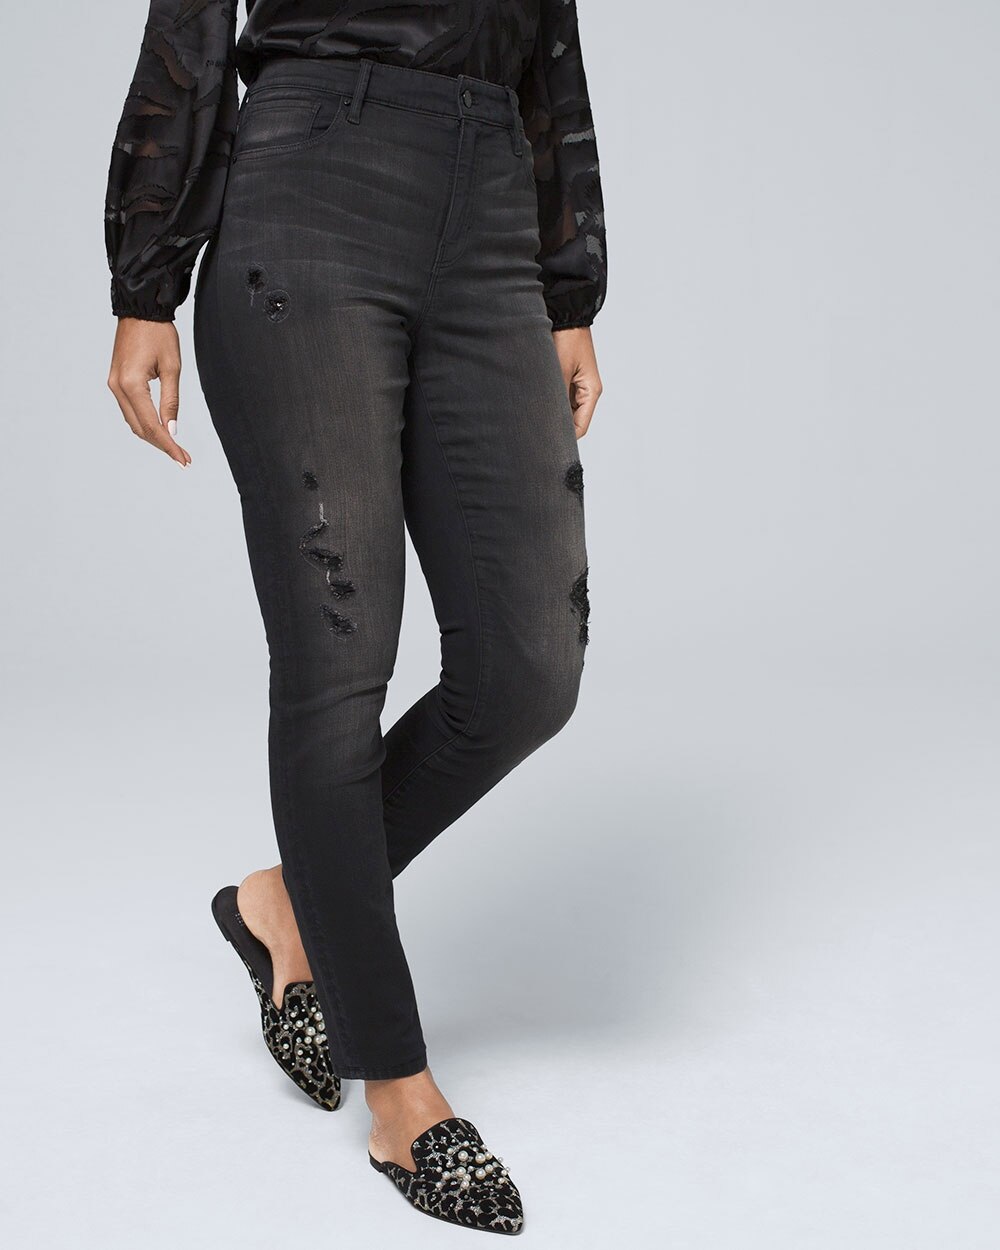 Curvy-Fit High-Rise Sequin Destructed Skinny Jeans